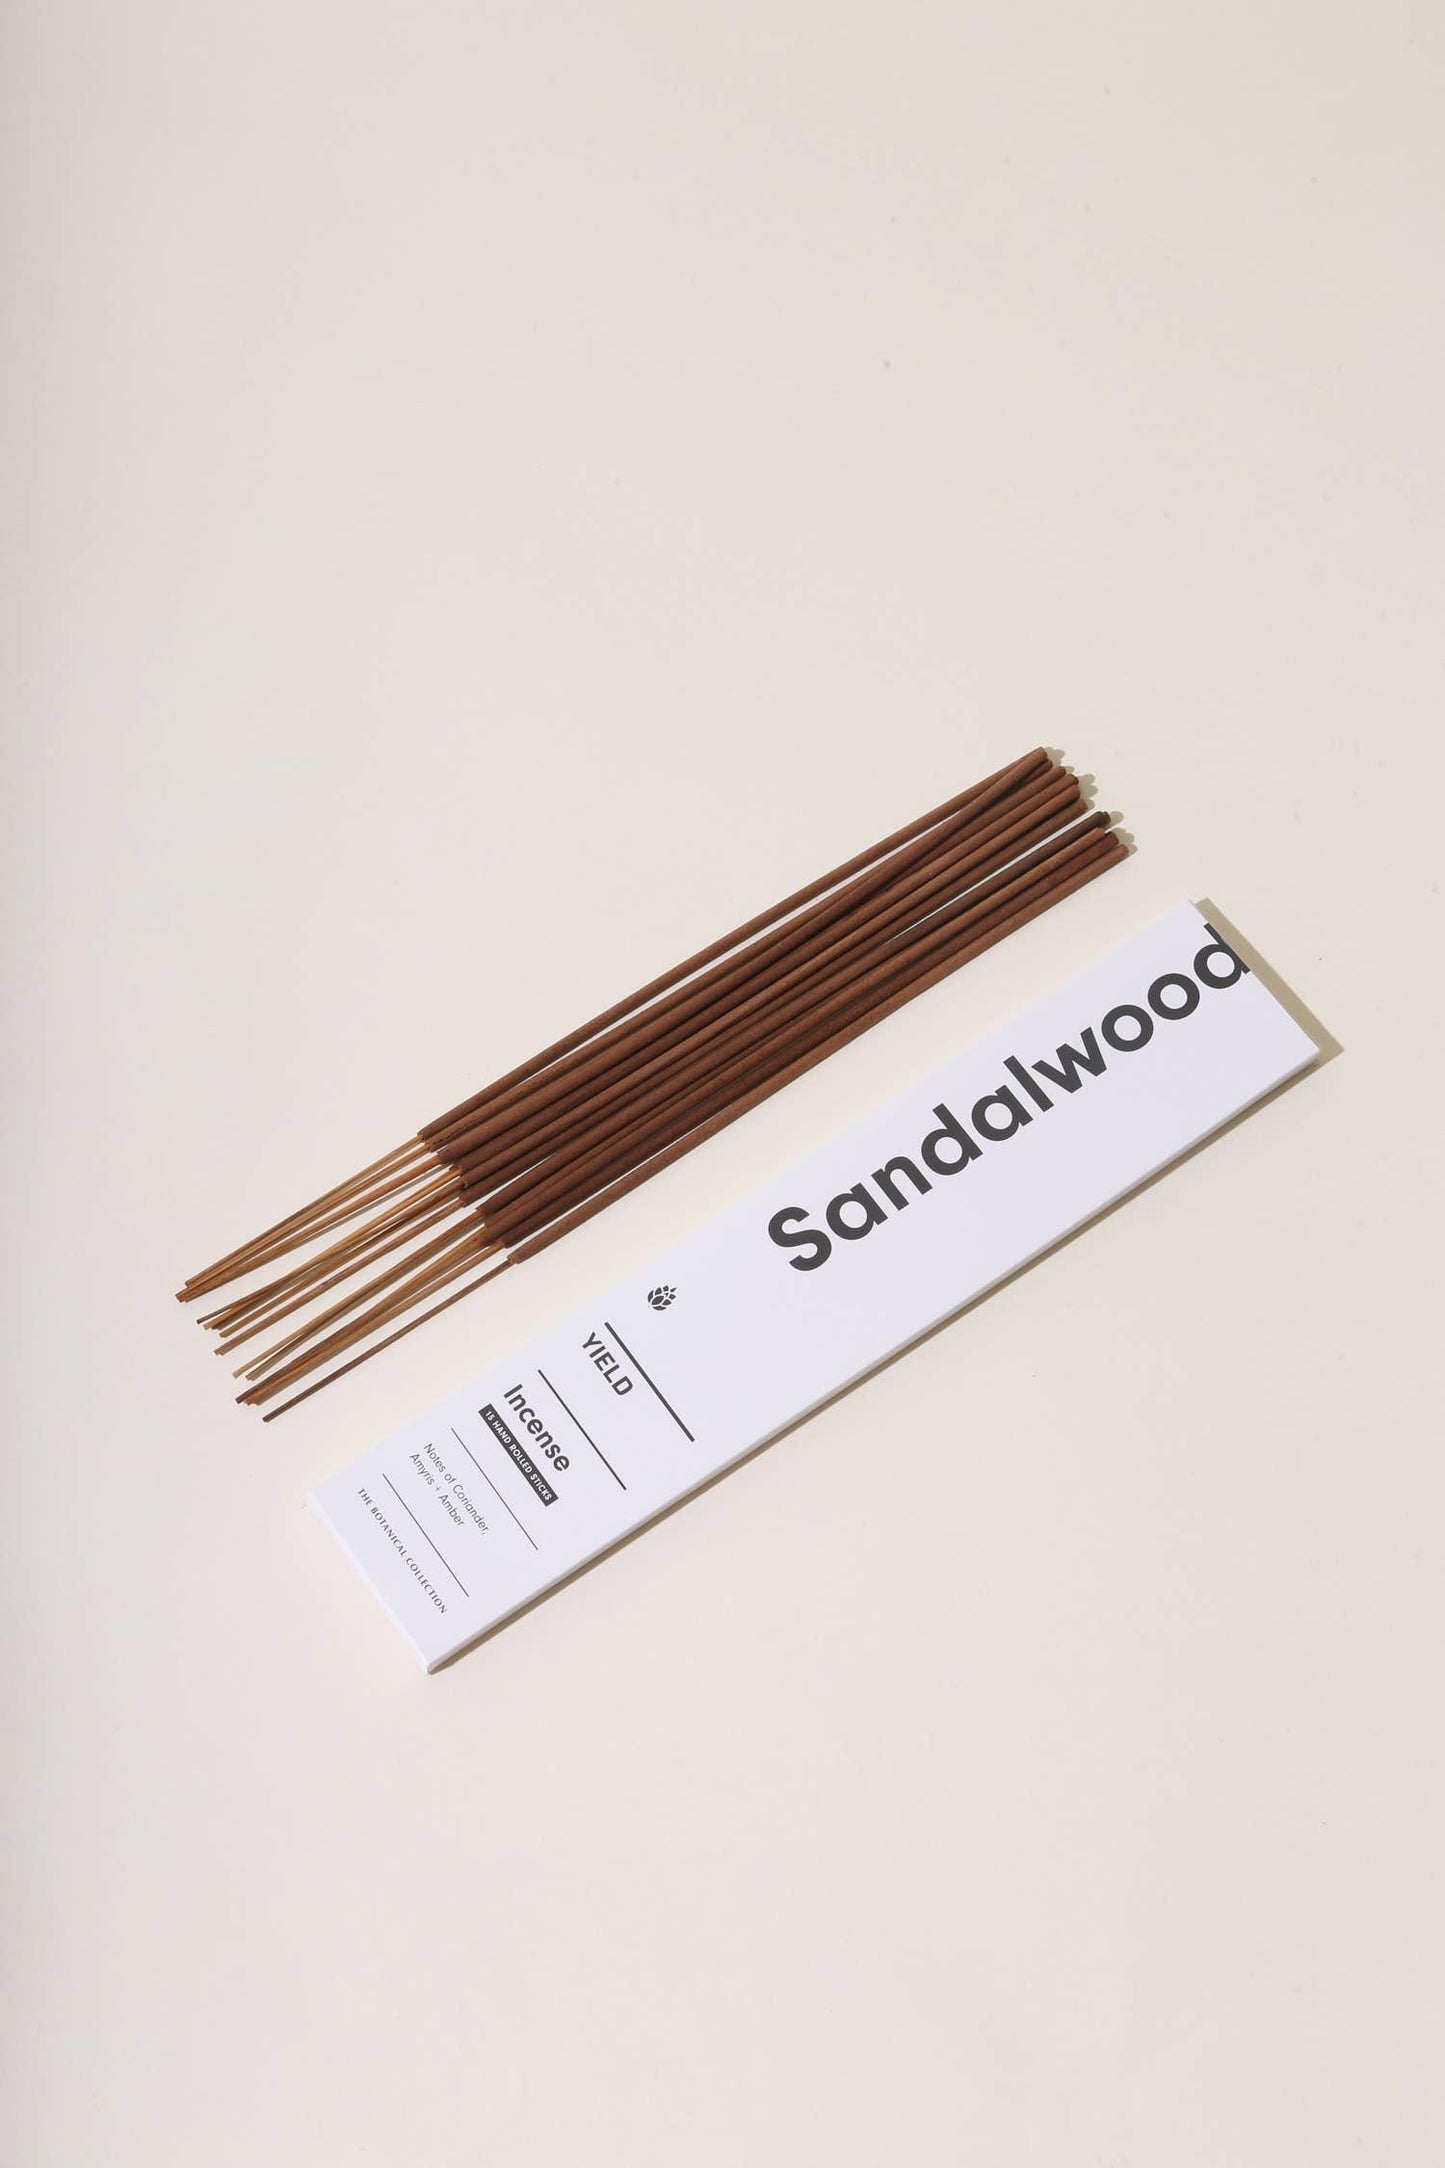 Sandalwood Incense by Yield - Haven